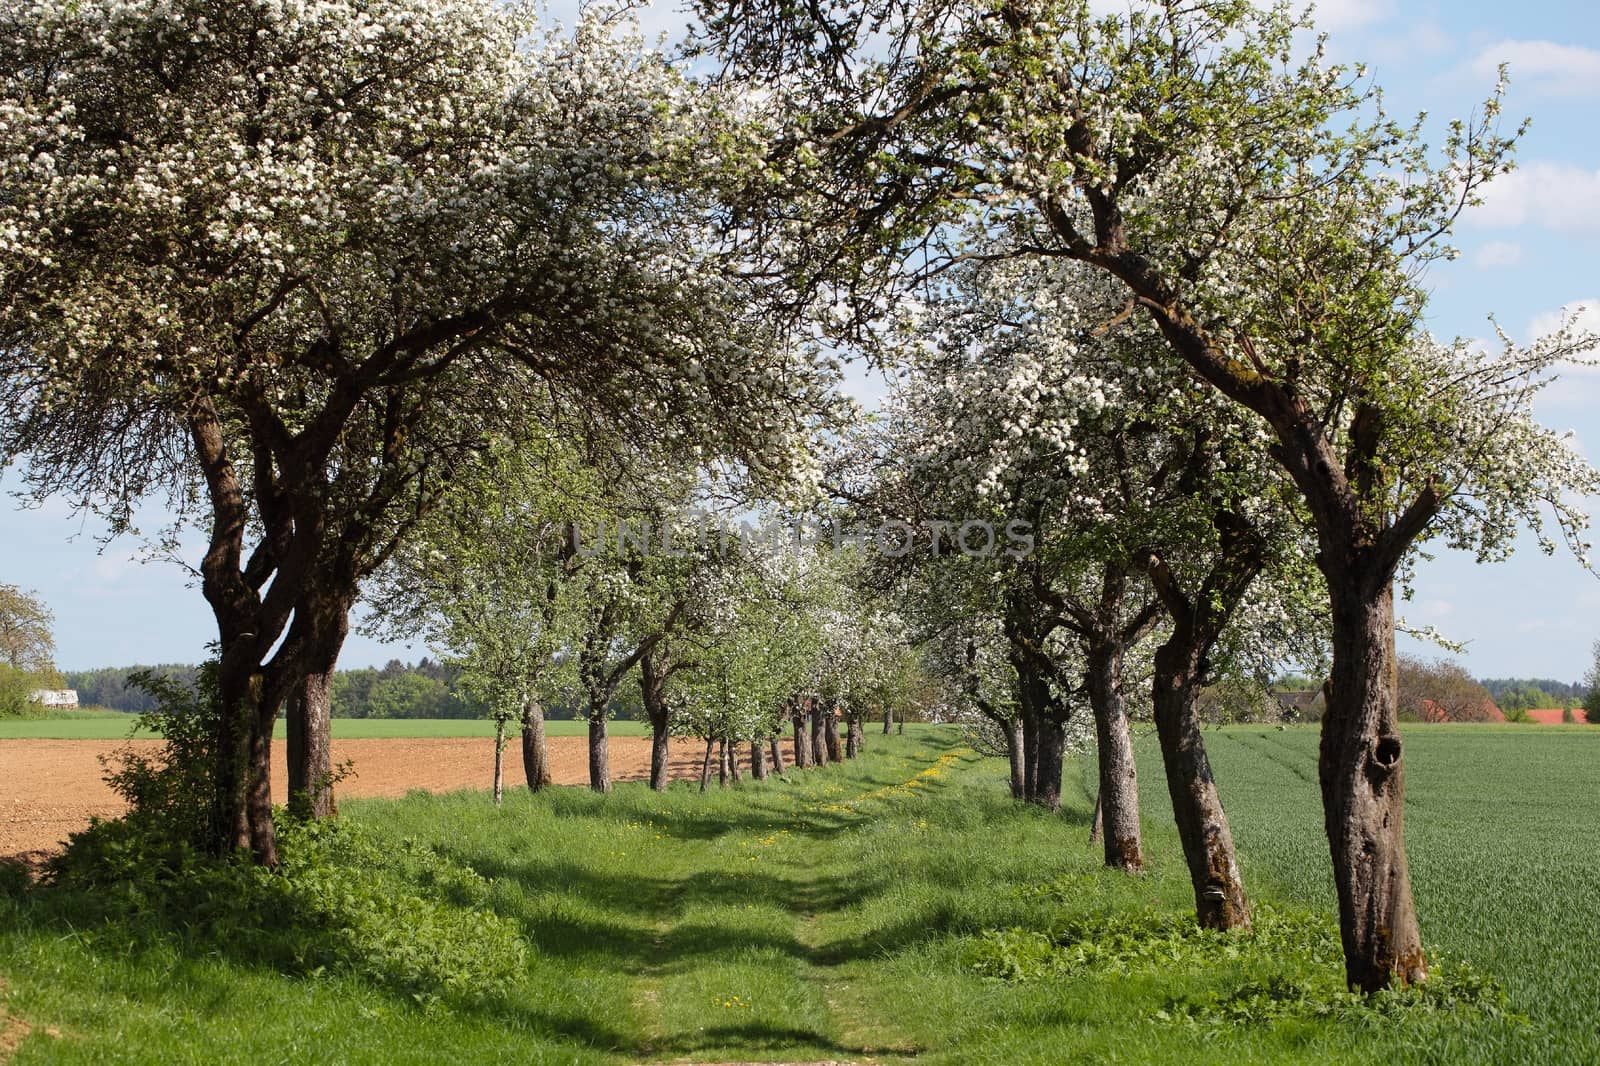 A way with old apples trees in flower. 